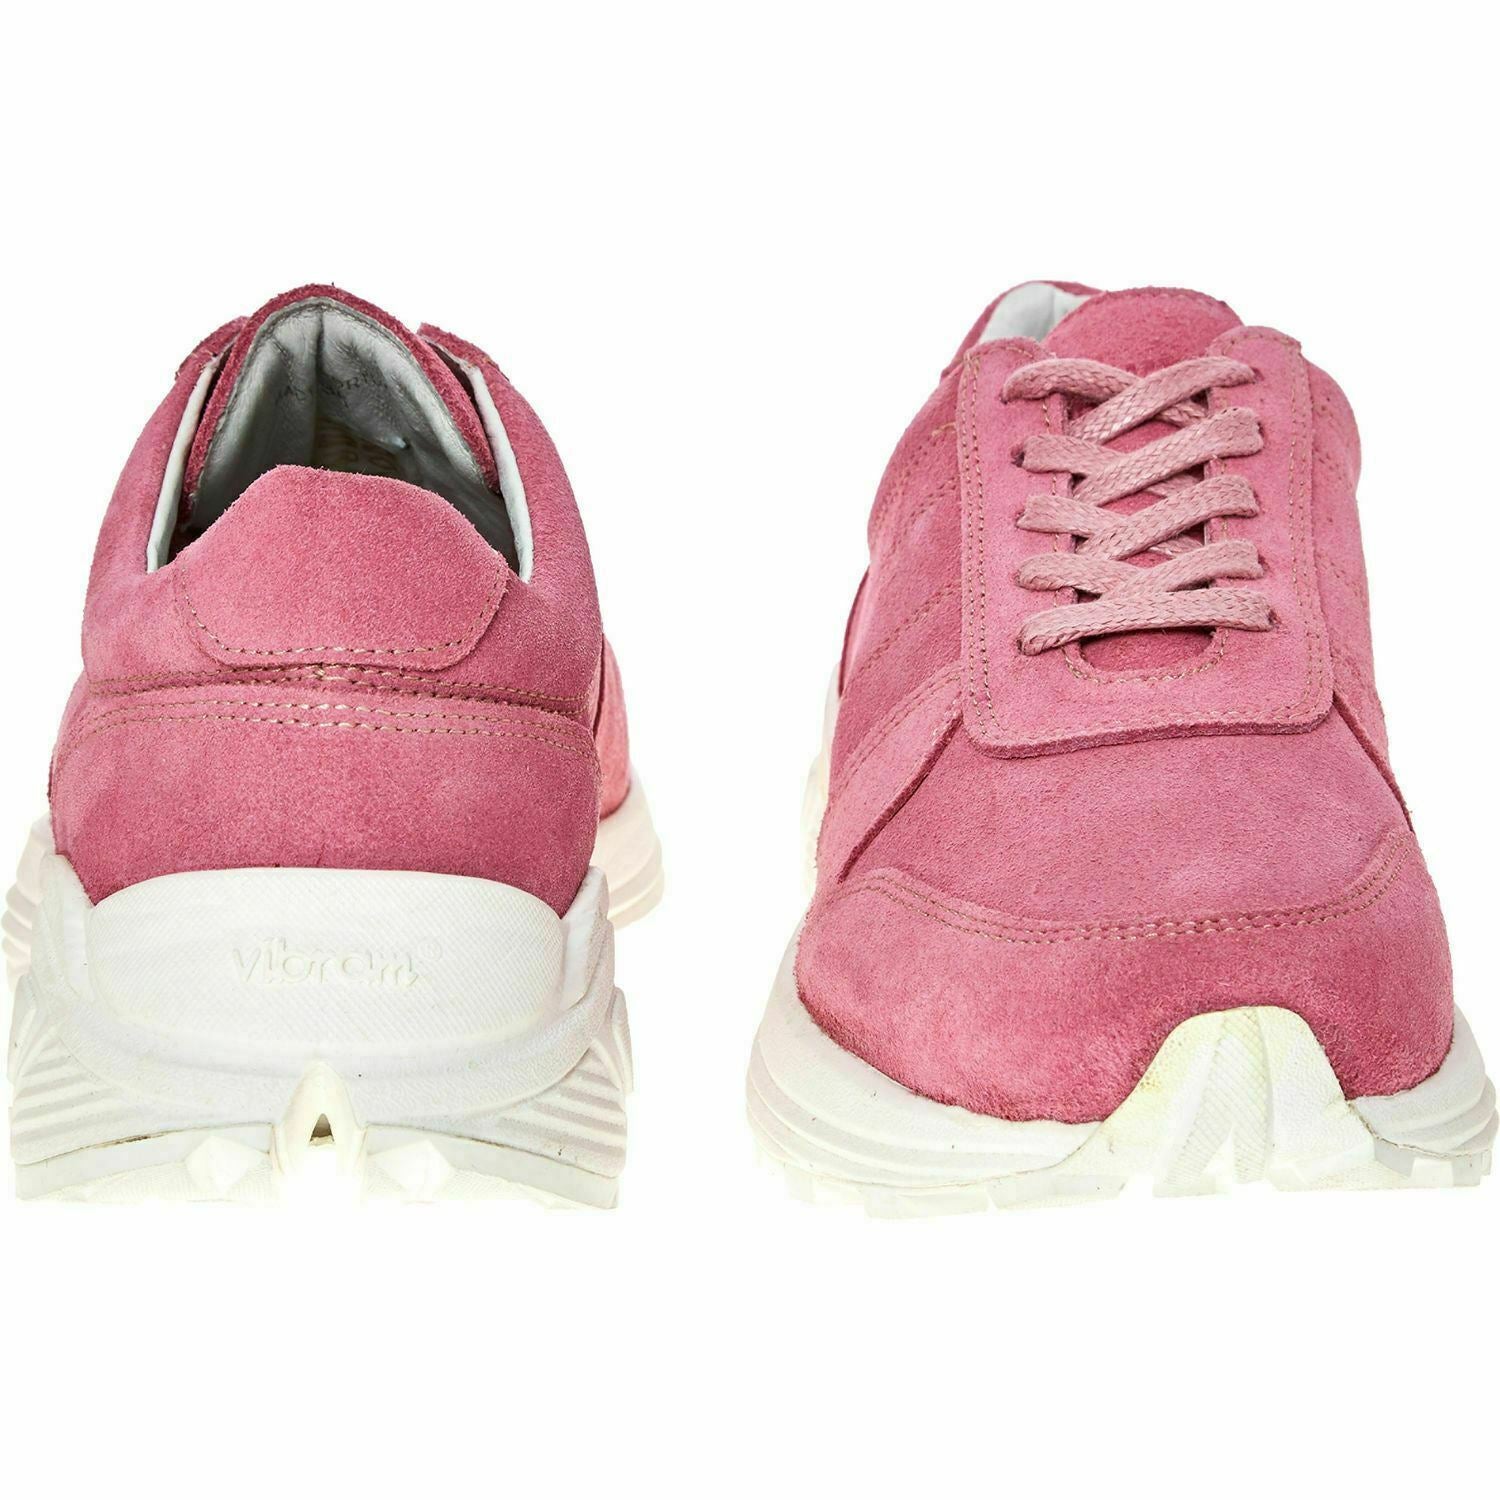 GARMENT PROJECT Women's RUNNER Pink Suede Leather Trainers, size UK 4